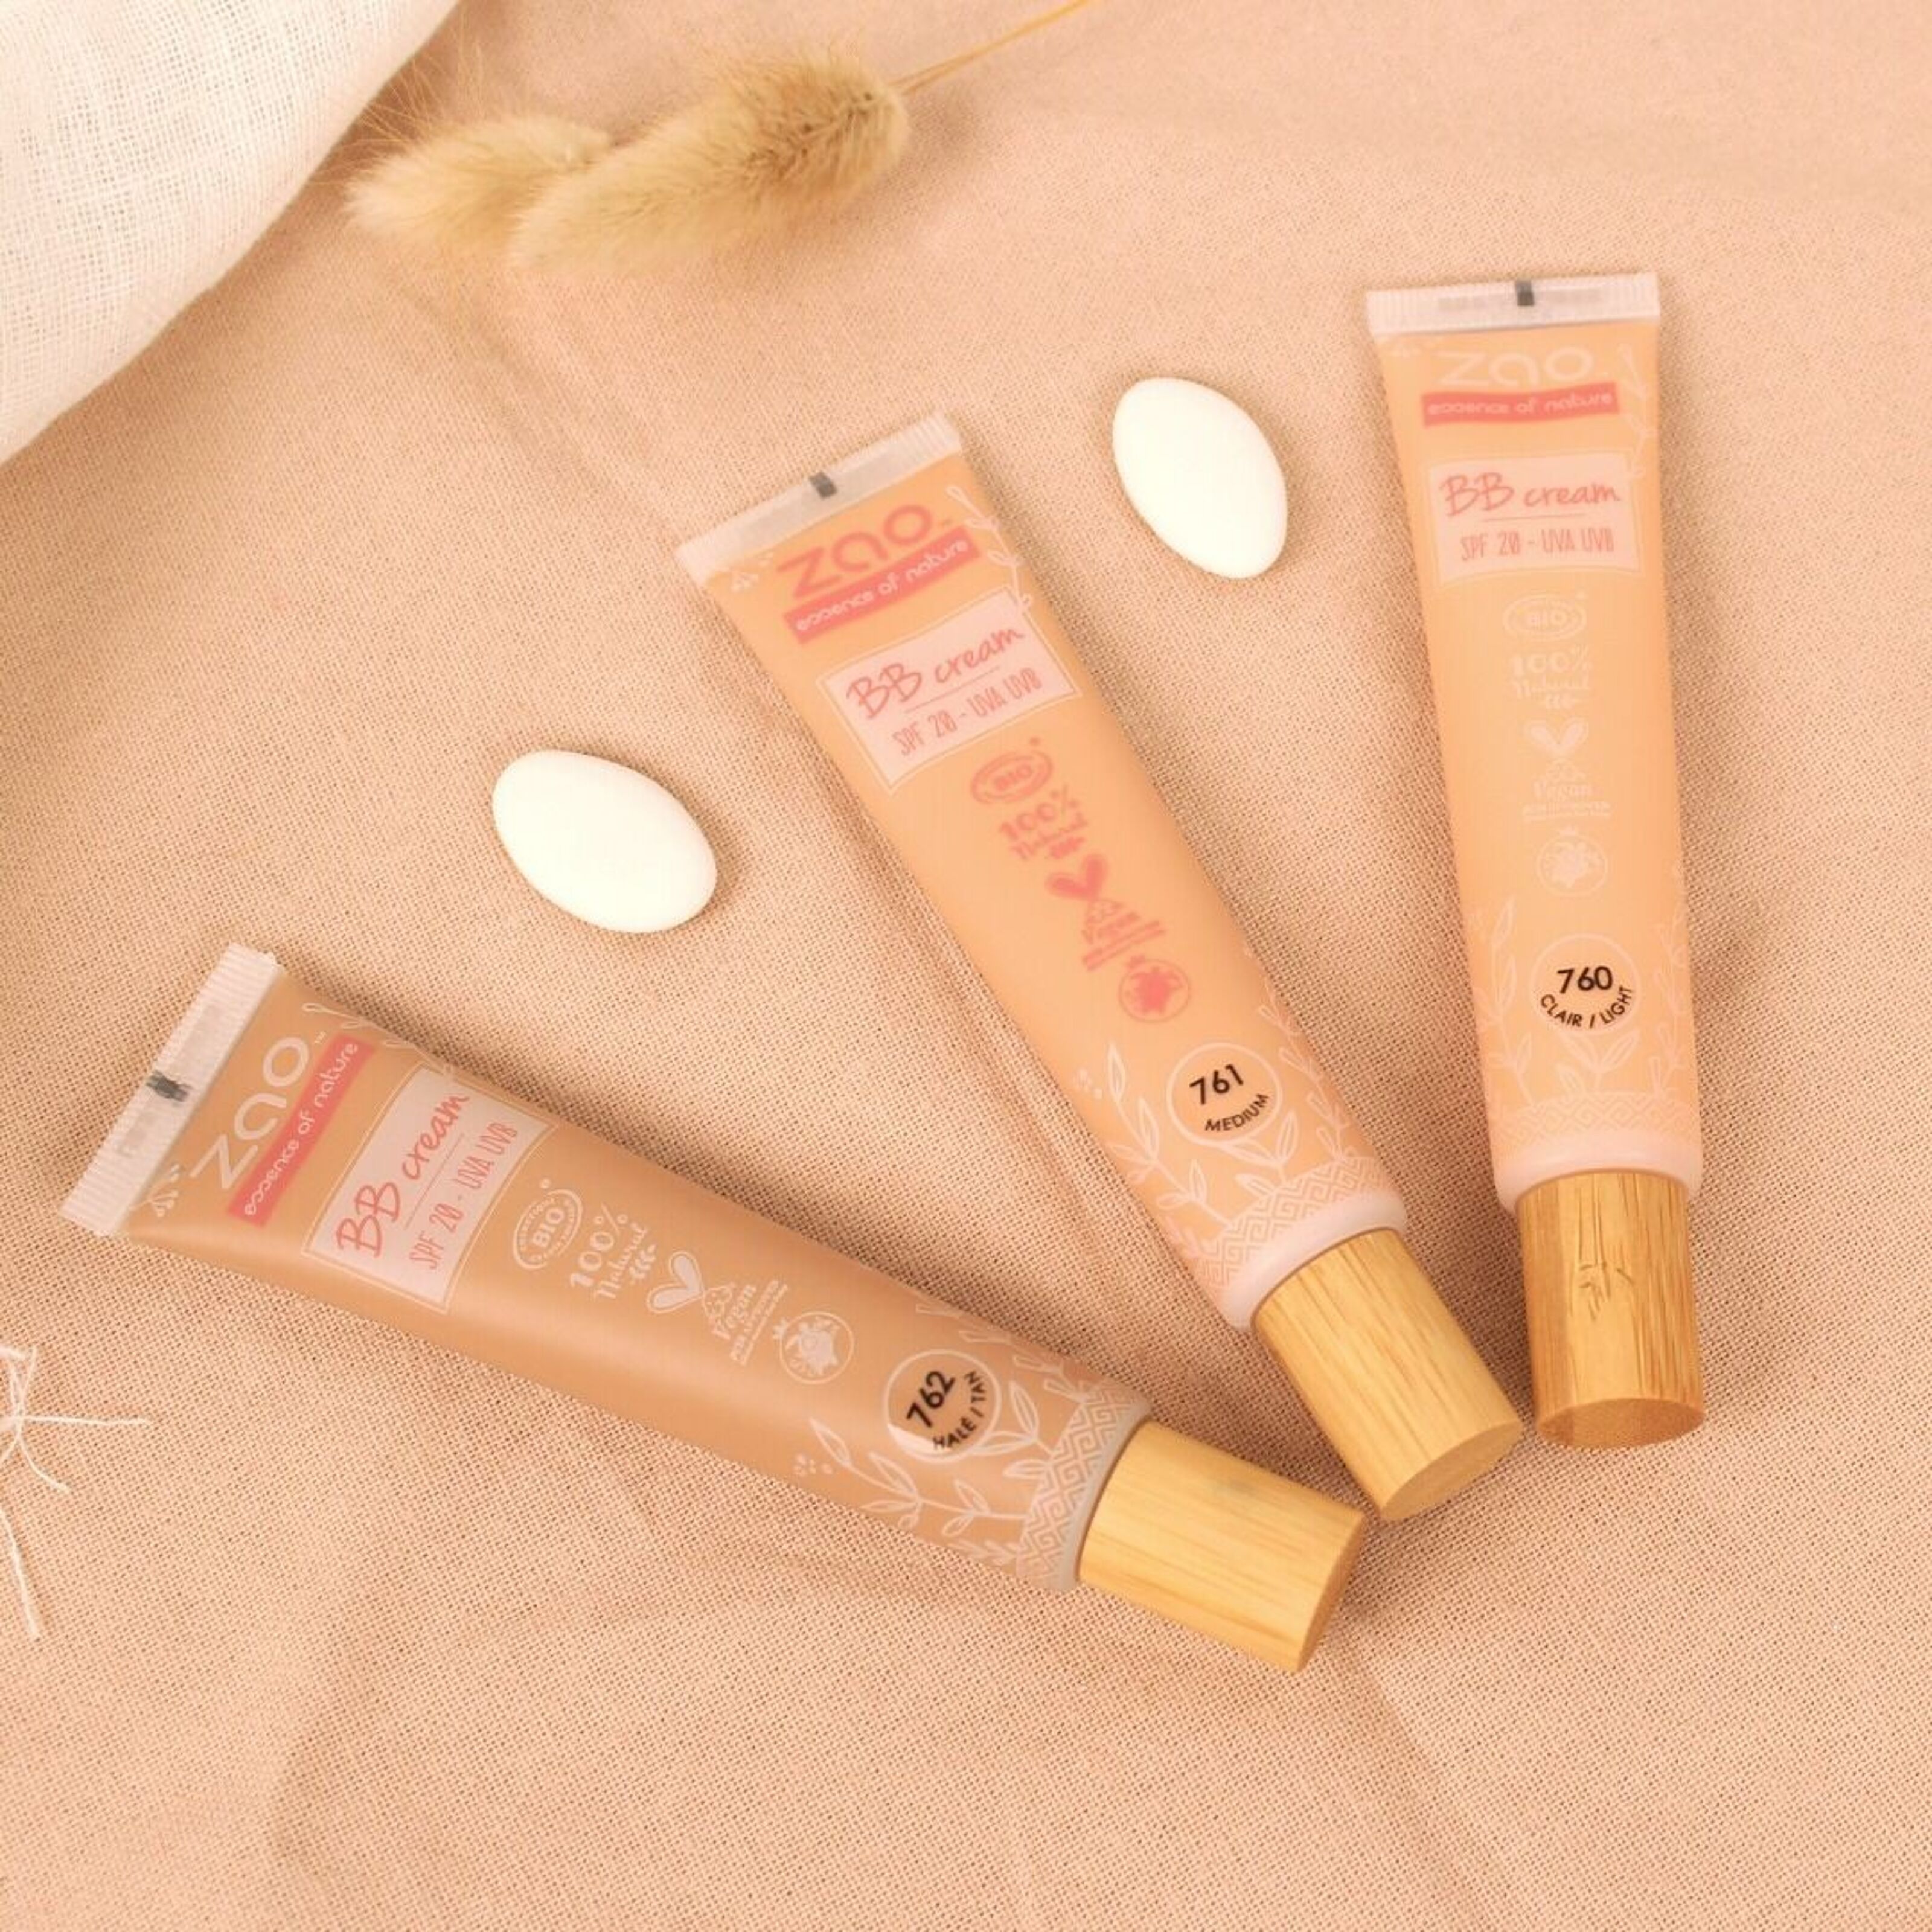 Wholesale spf 30 bb cream that Are Cost-Efficient 